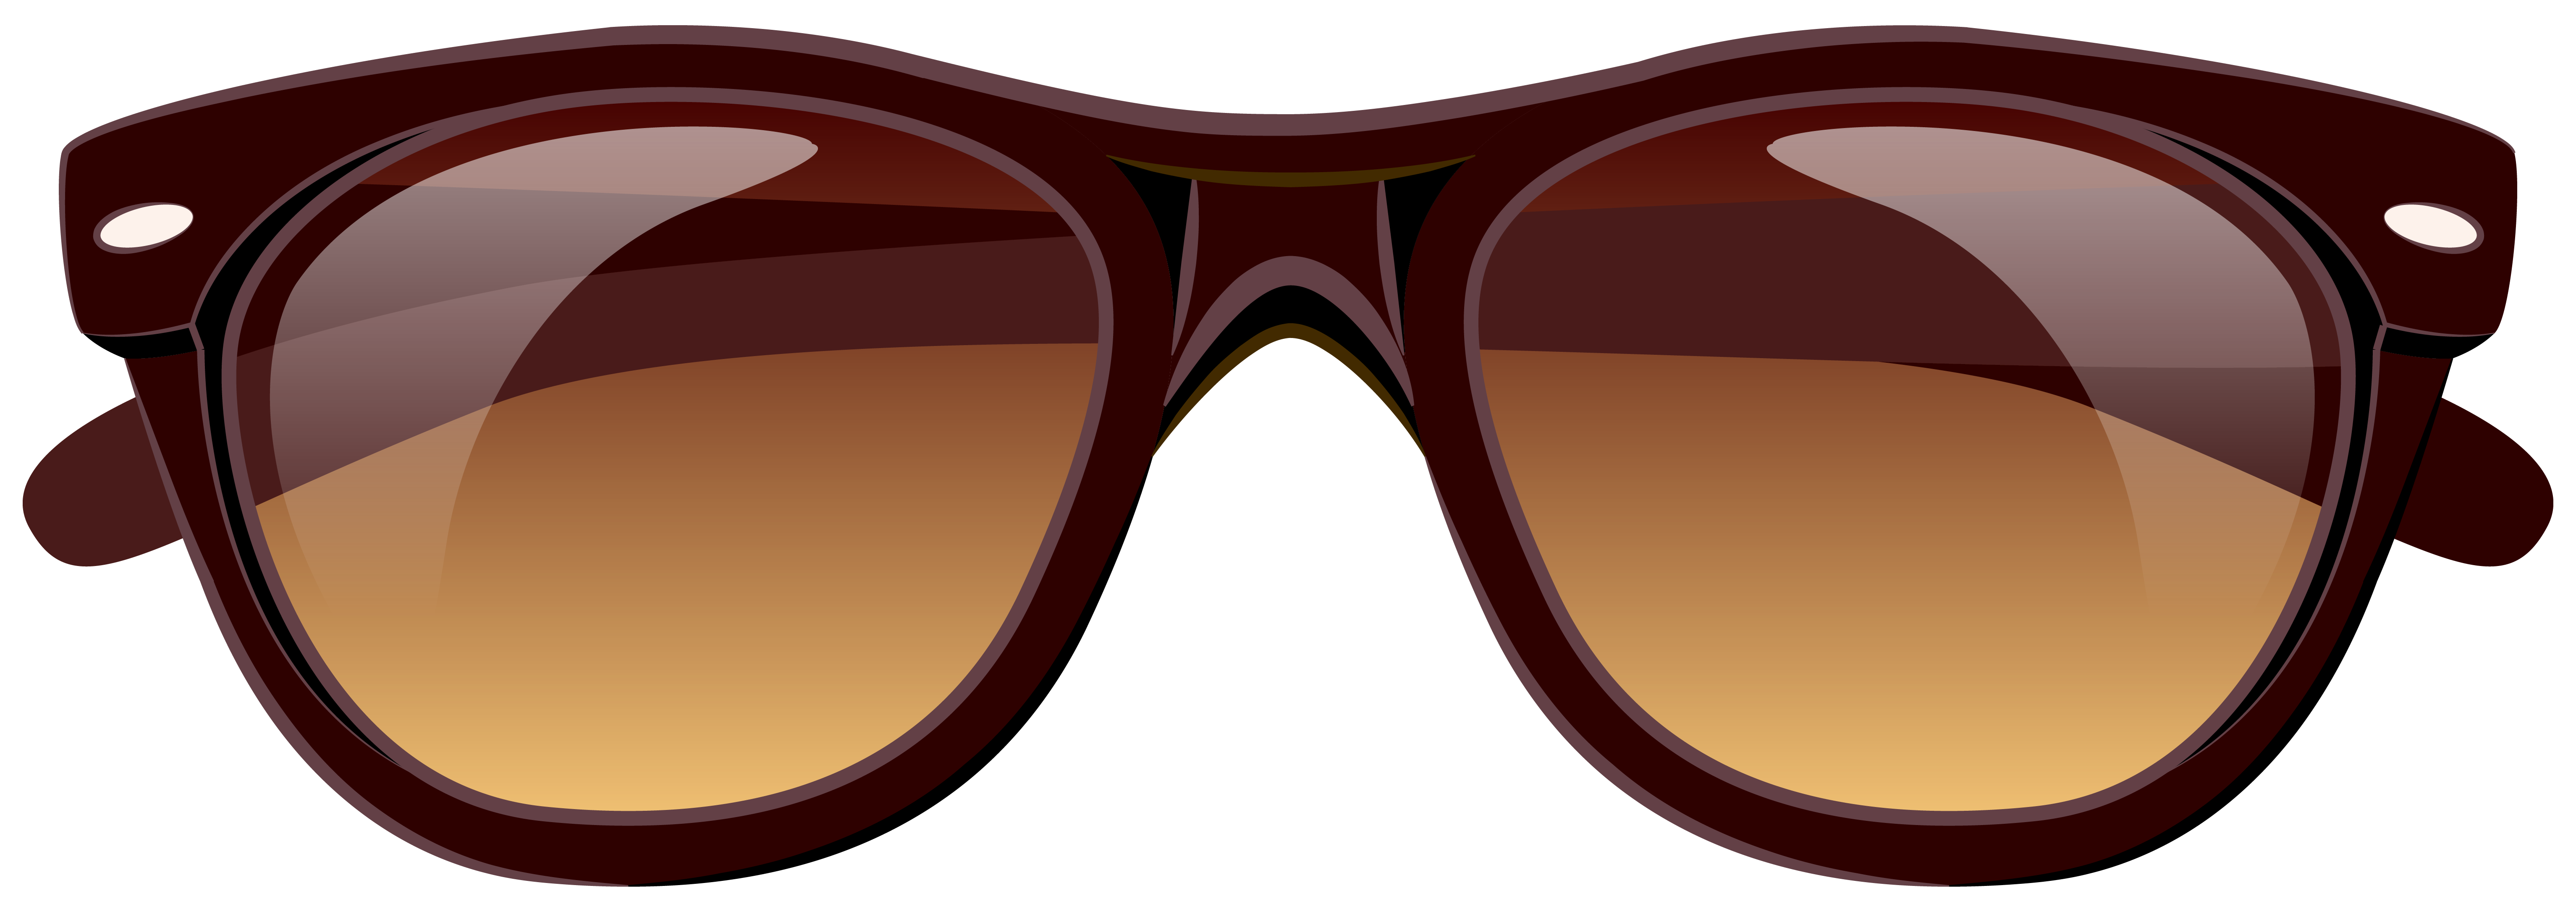 Watermelon clipart sunglasses. Brown png picture gallery